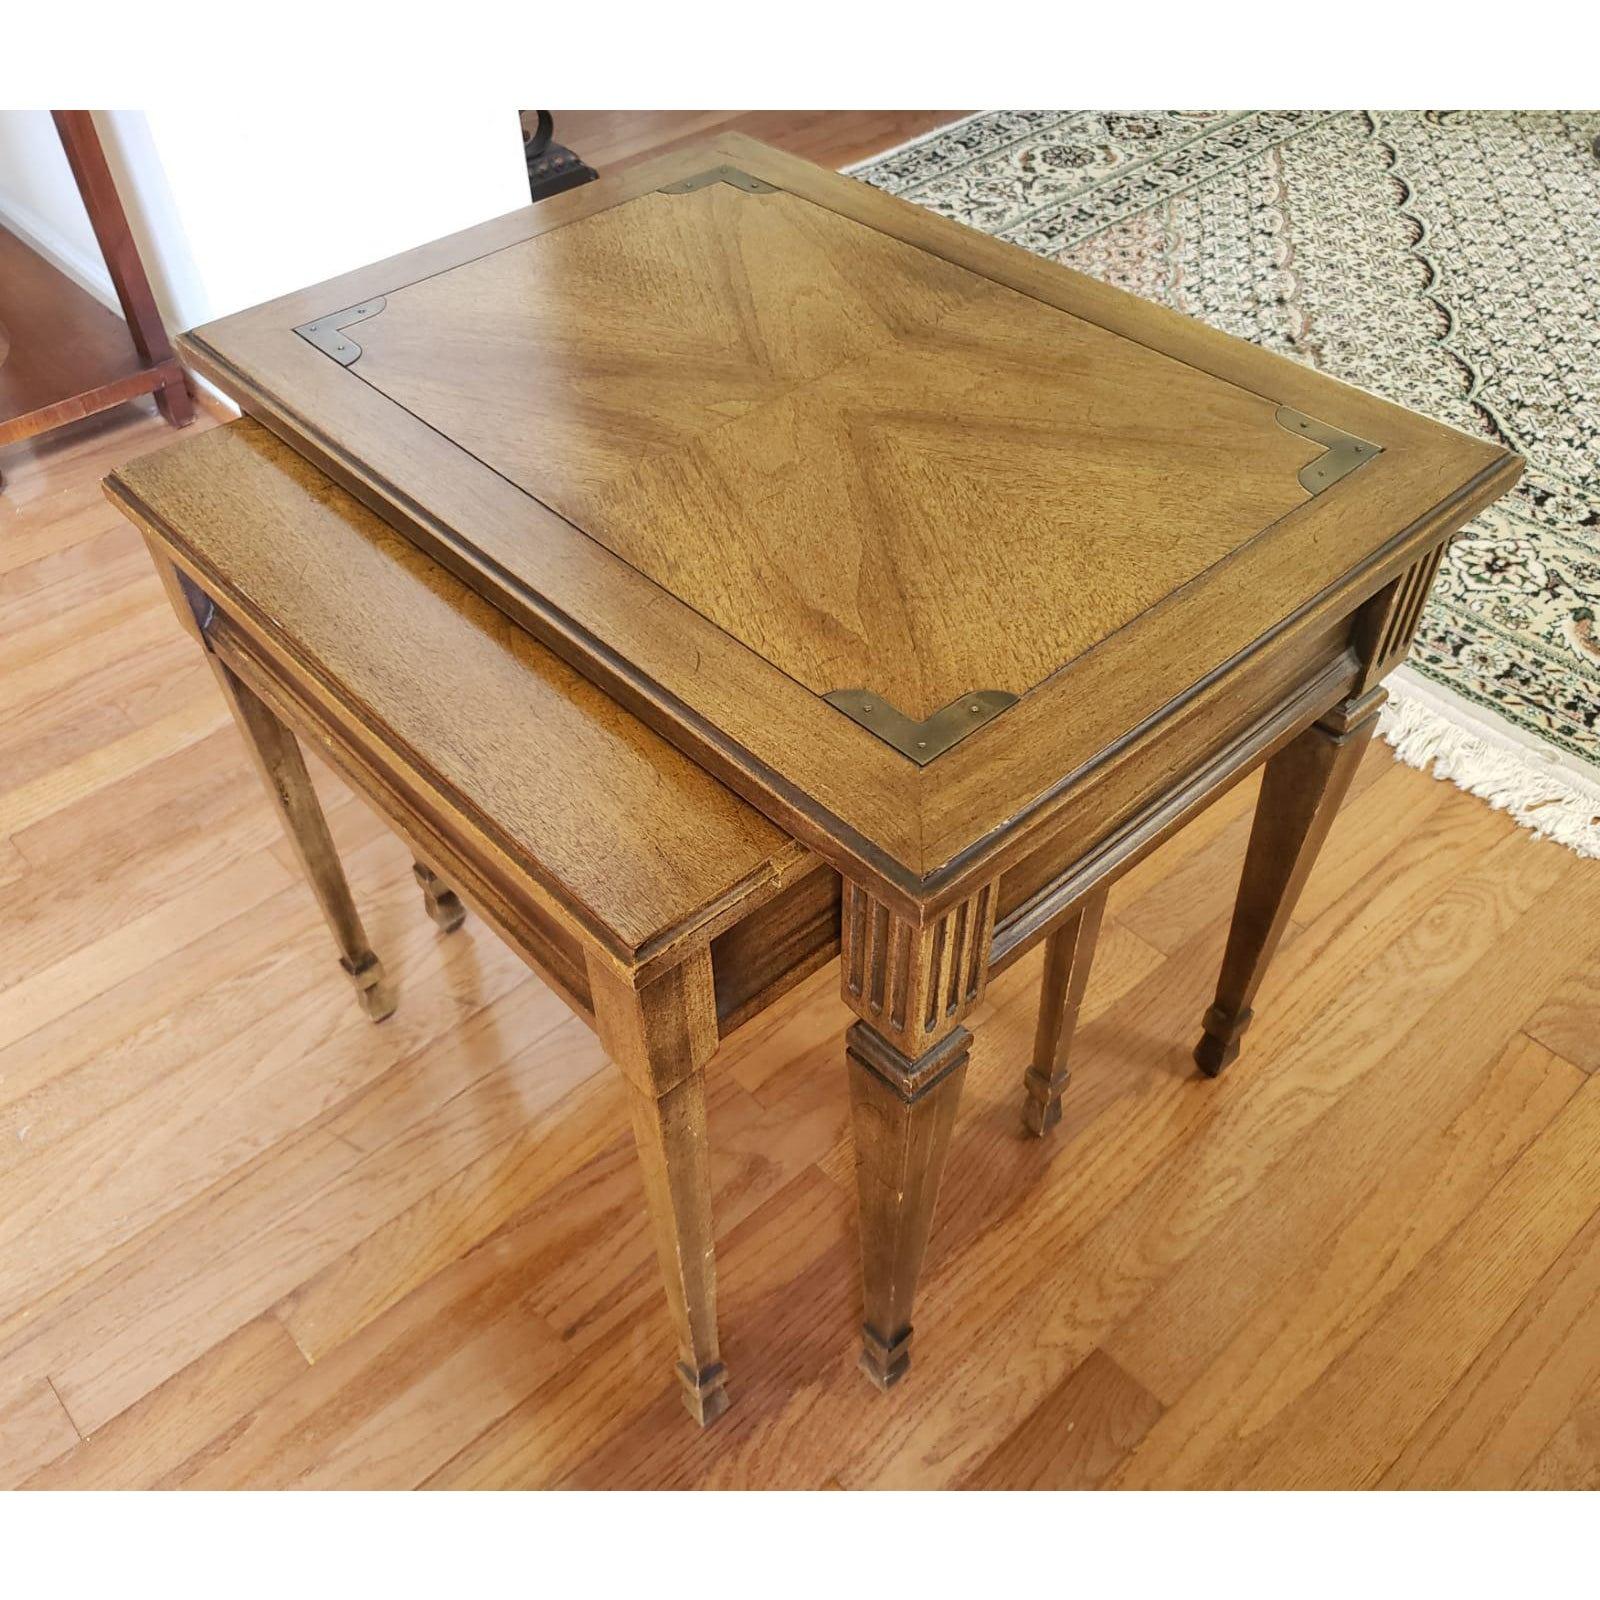 Mid-Century Modern 1970s Campaign Style Walnut Nesting Tables, Set of 2 For Sale